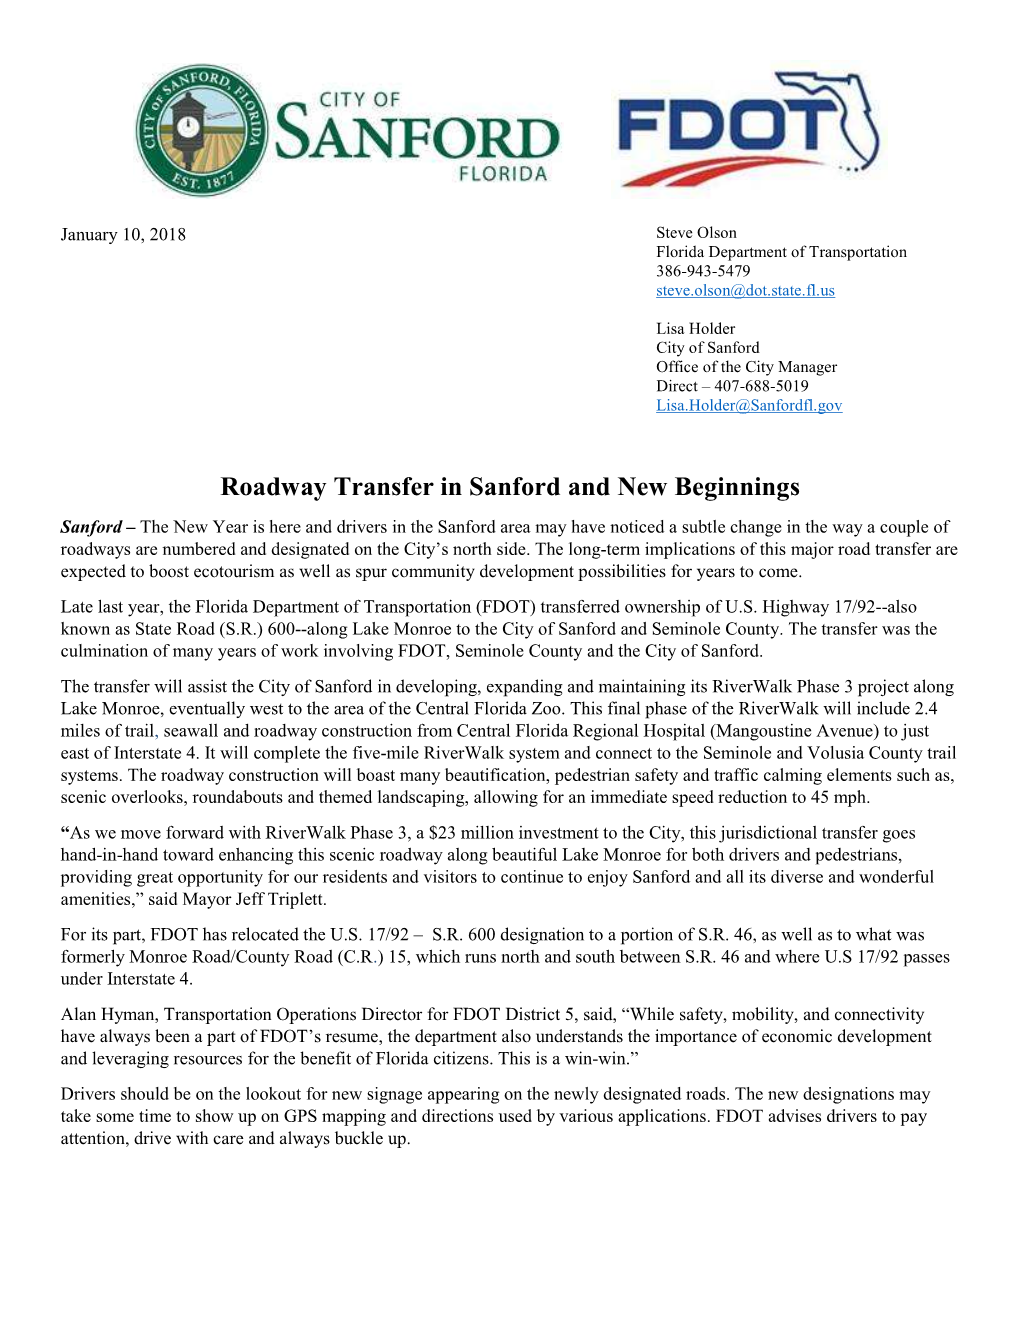 Roadway Transfer in Sanford and New Beginnings